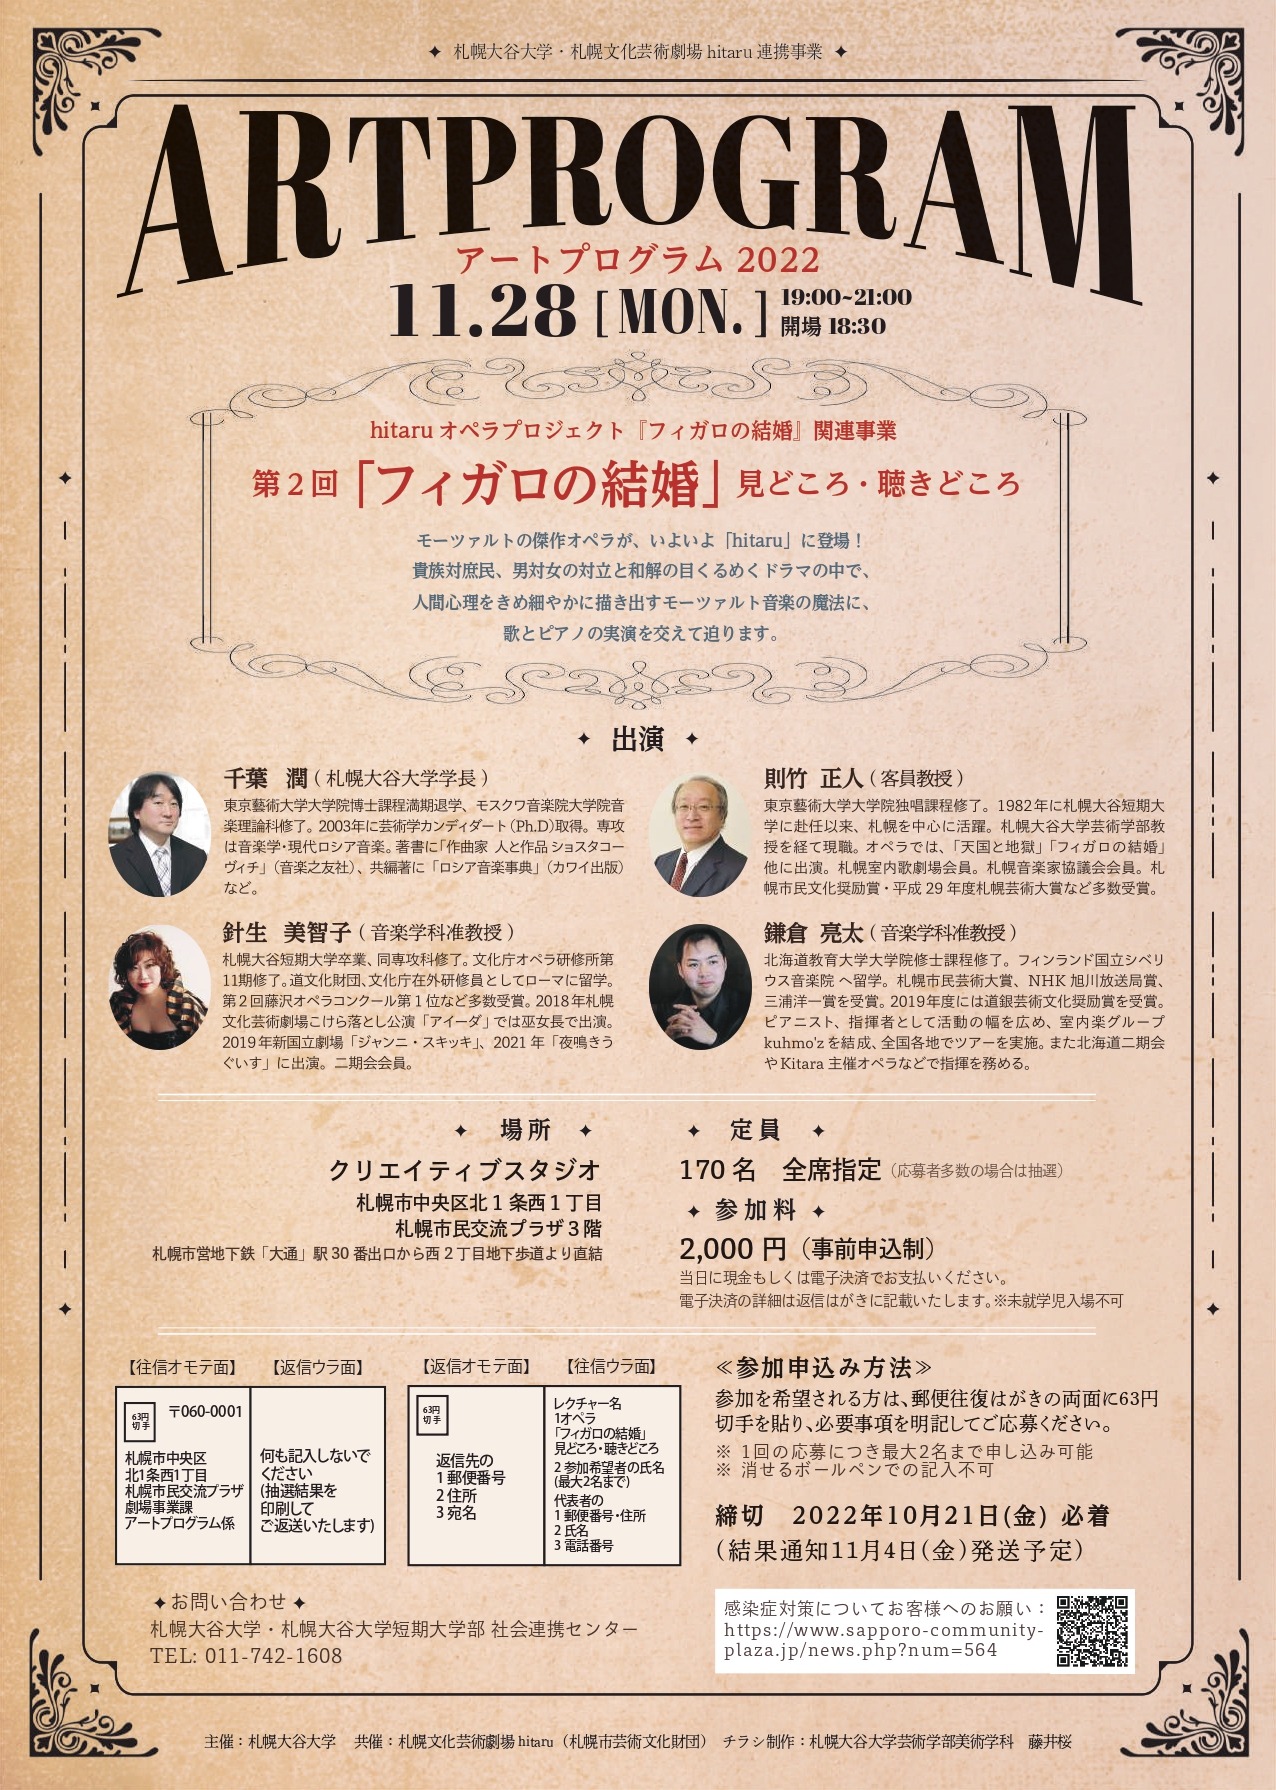 Sapporo Otani University & hitaru Joint ProjectArt Program 2022 No. 2Music and Performance Highlights from the Opera “The Marriage of Figaro” image